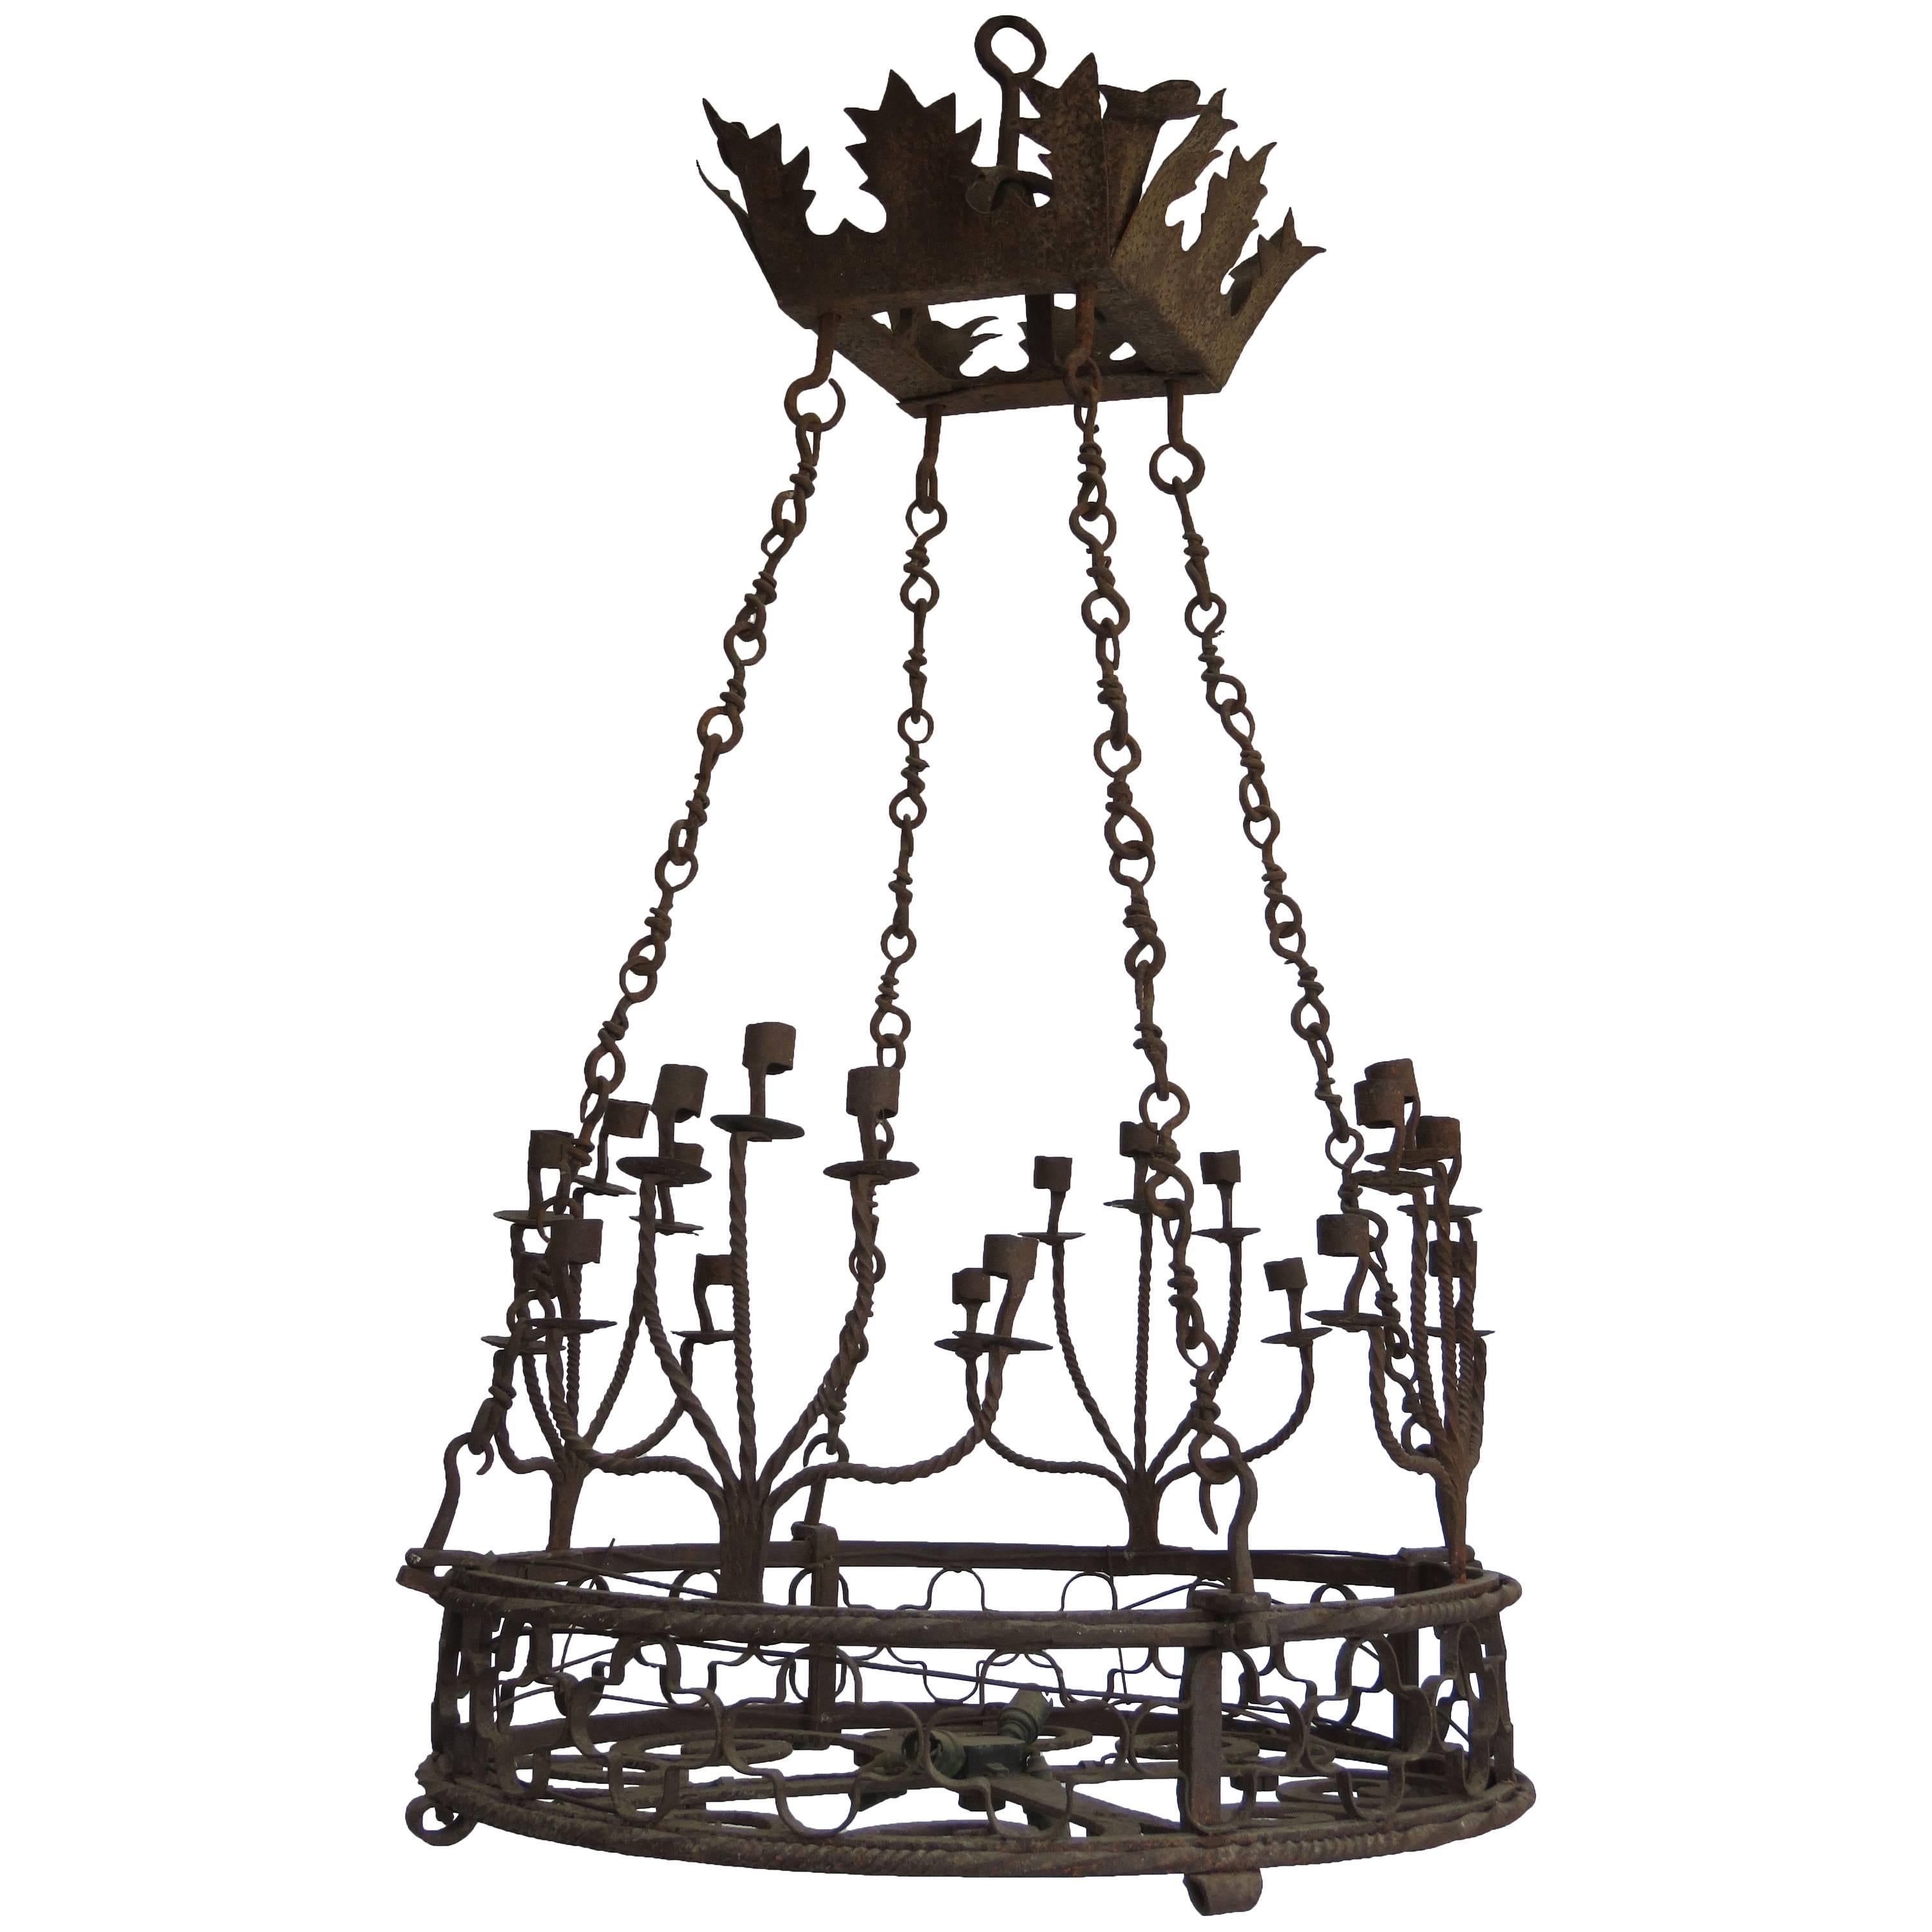 Early 19th Century, Italian Iron Chandelier with Candleholders im Angebot